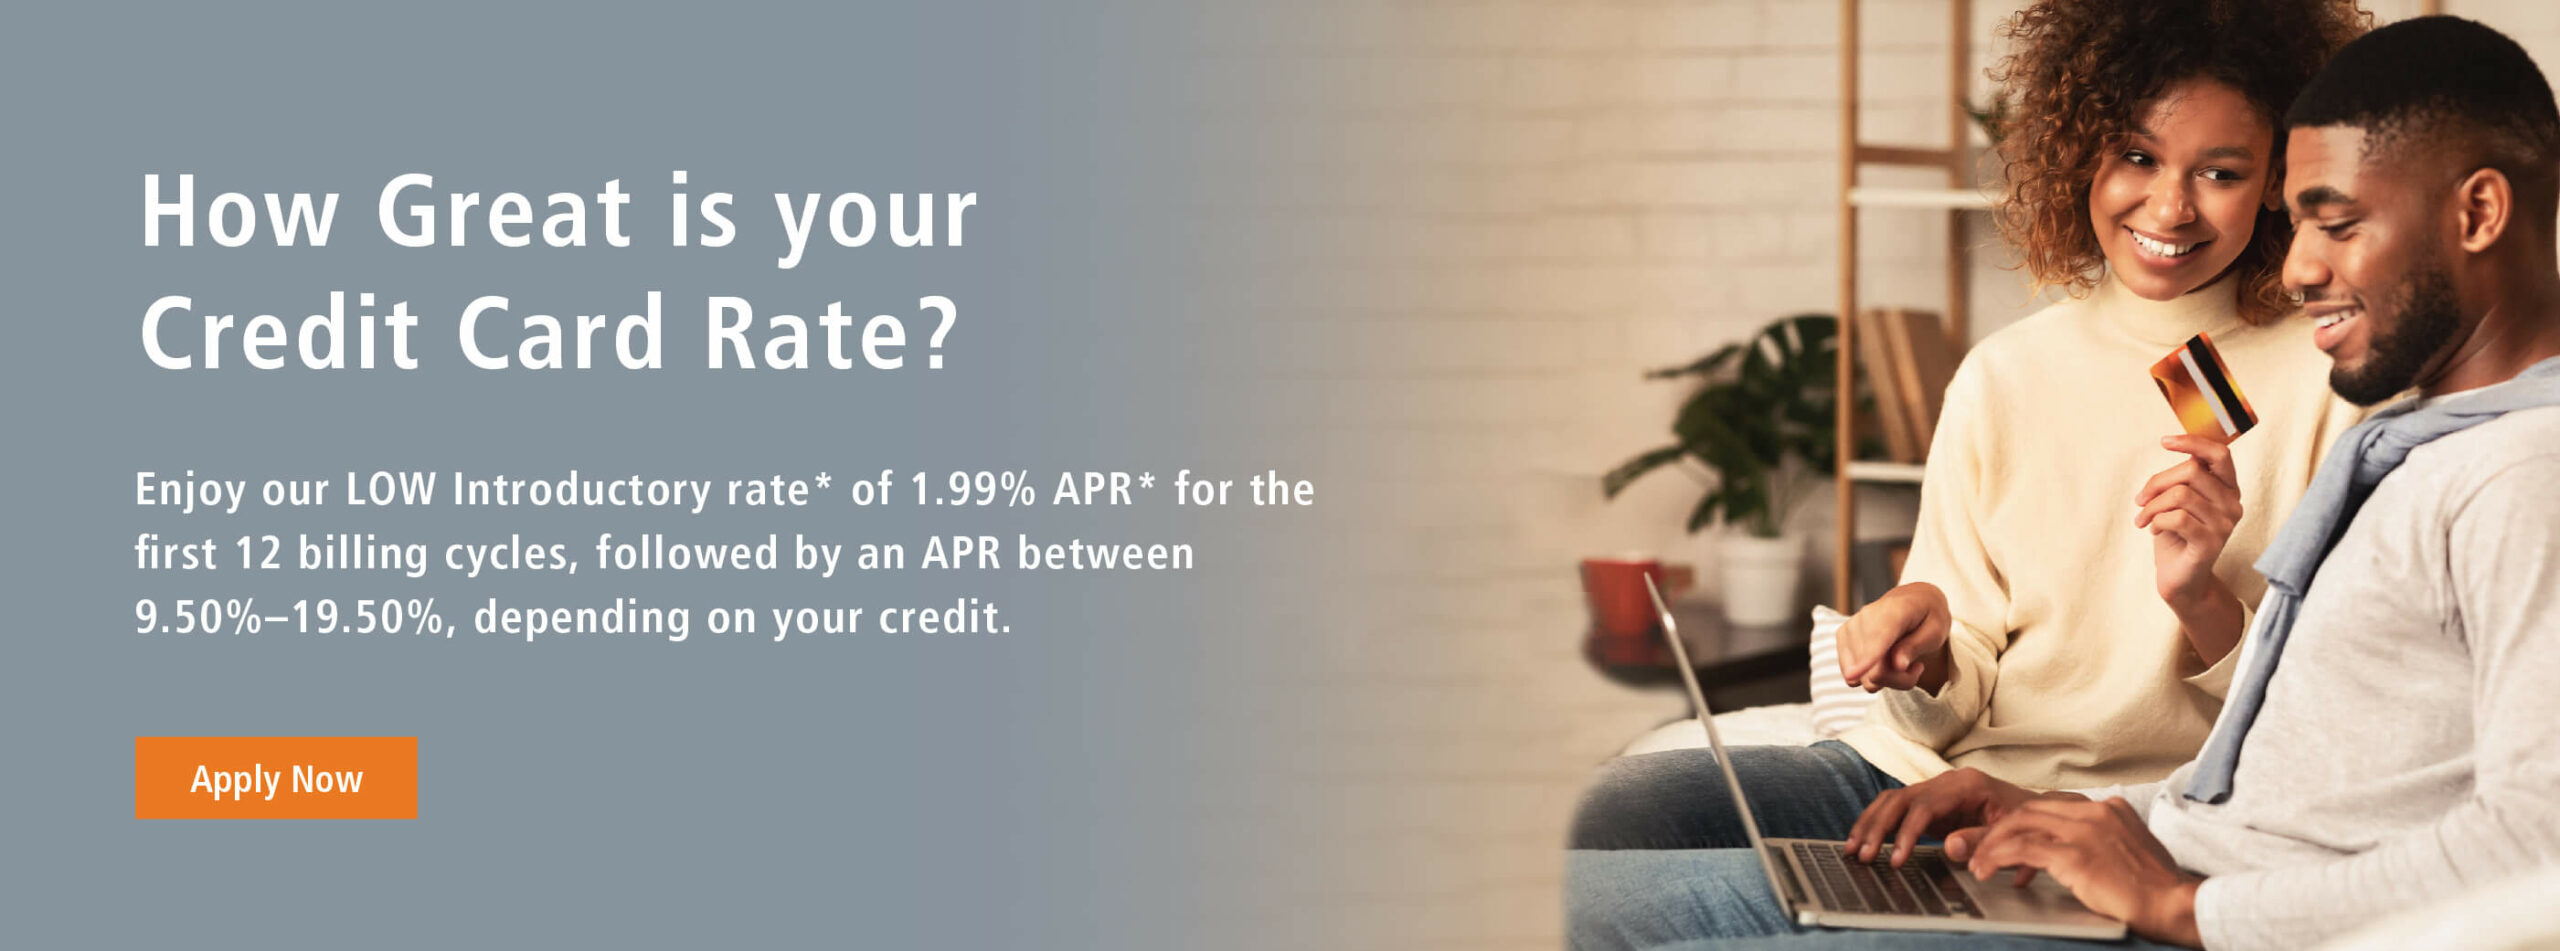 Credit Card Home Page Banner